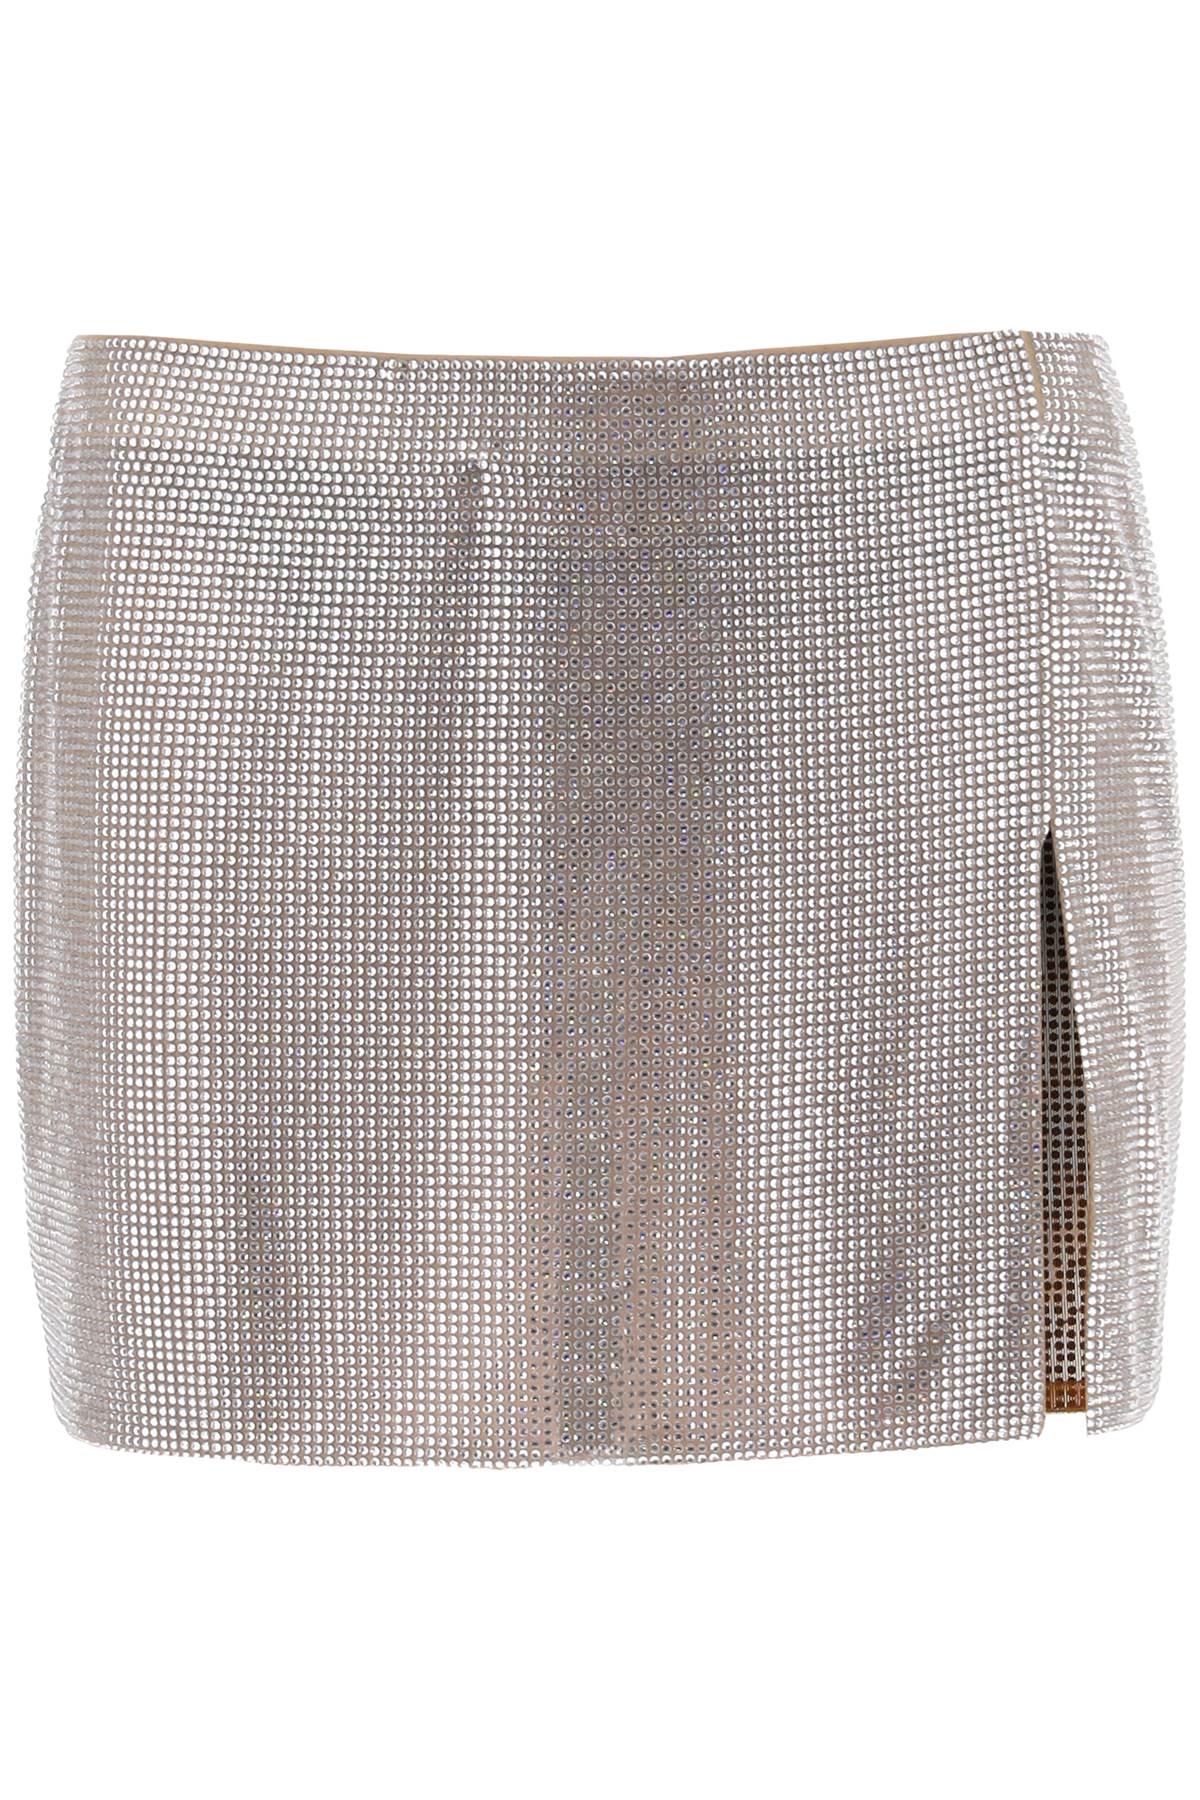 Giuseppe di Morabito Mini Skirt In Mesh With Crystals All-over